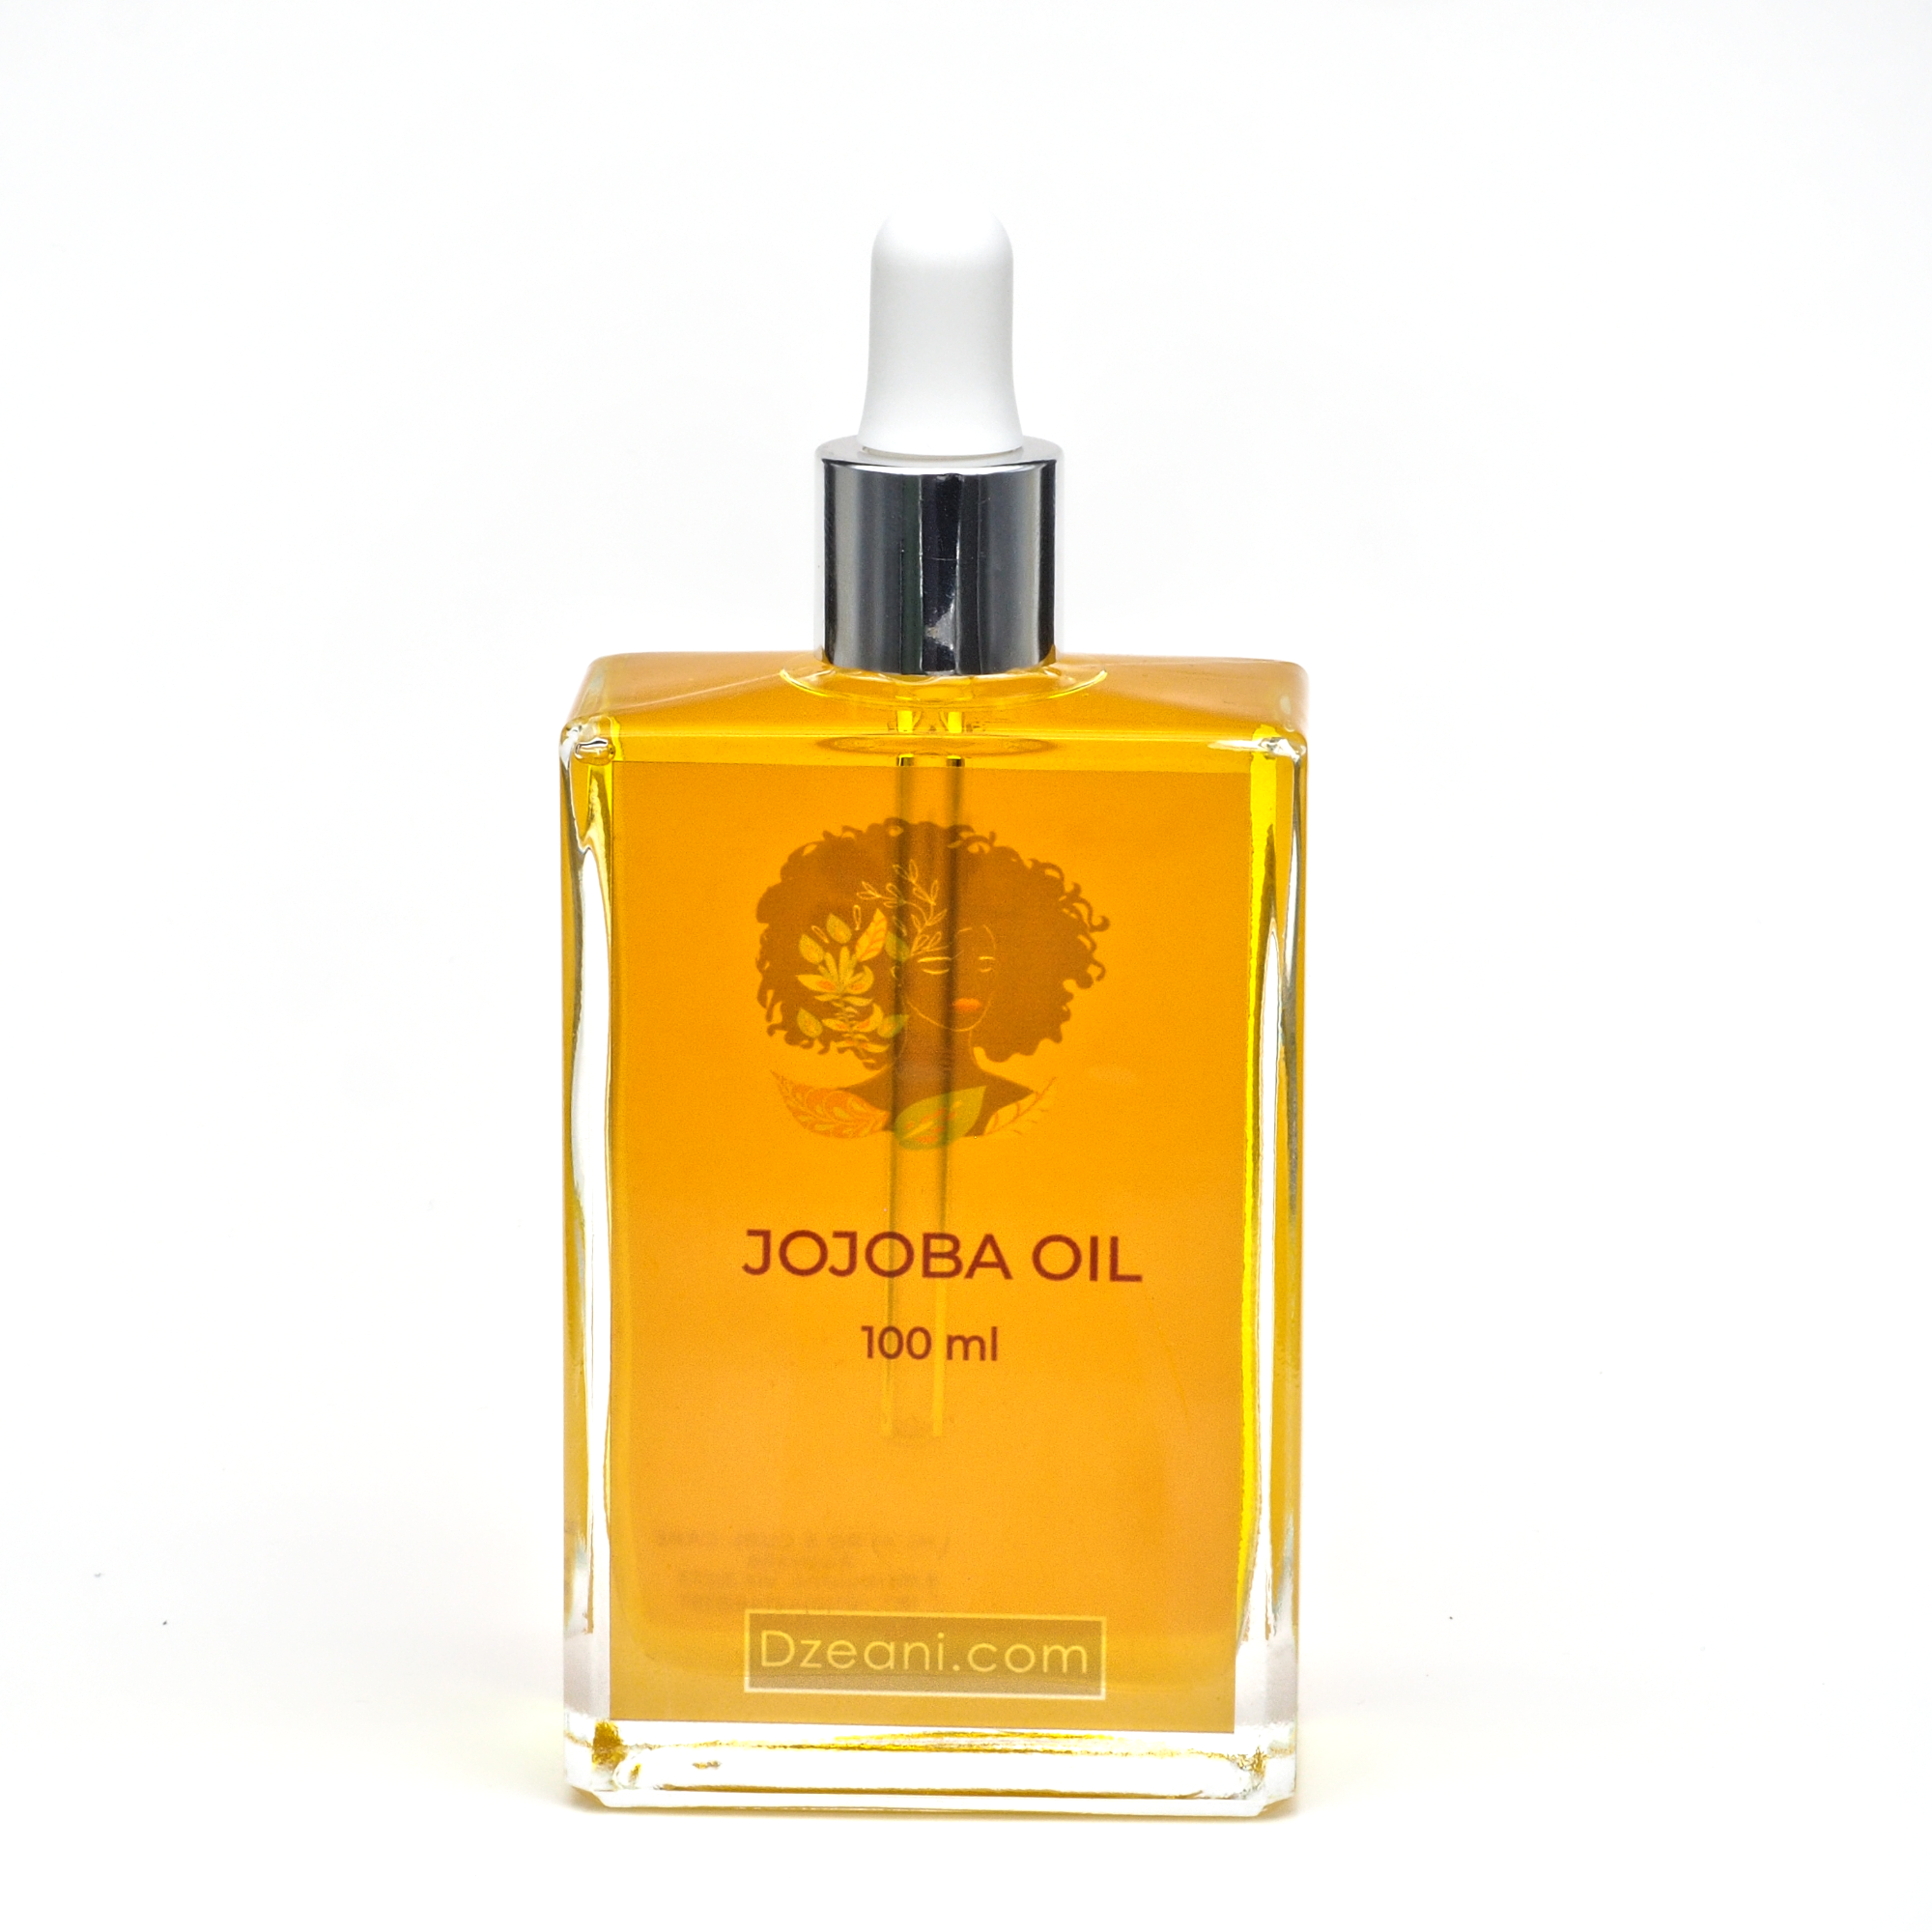 The Jojoba Oil from Dzeani is cold pressed extracted and unrefined to keep all the natural properties of original the seeds.